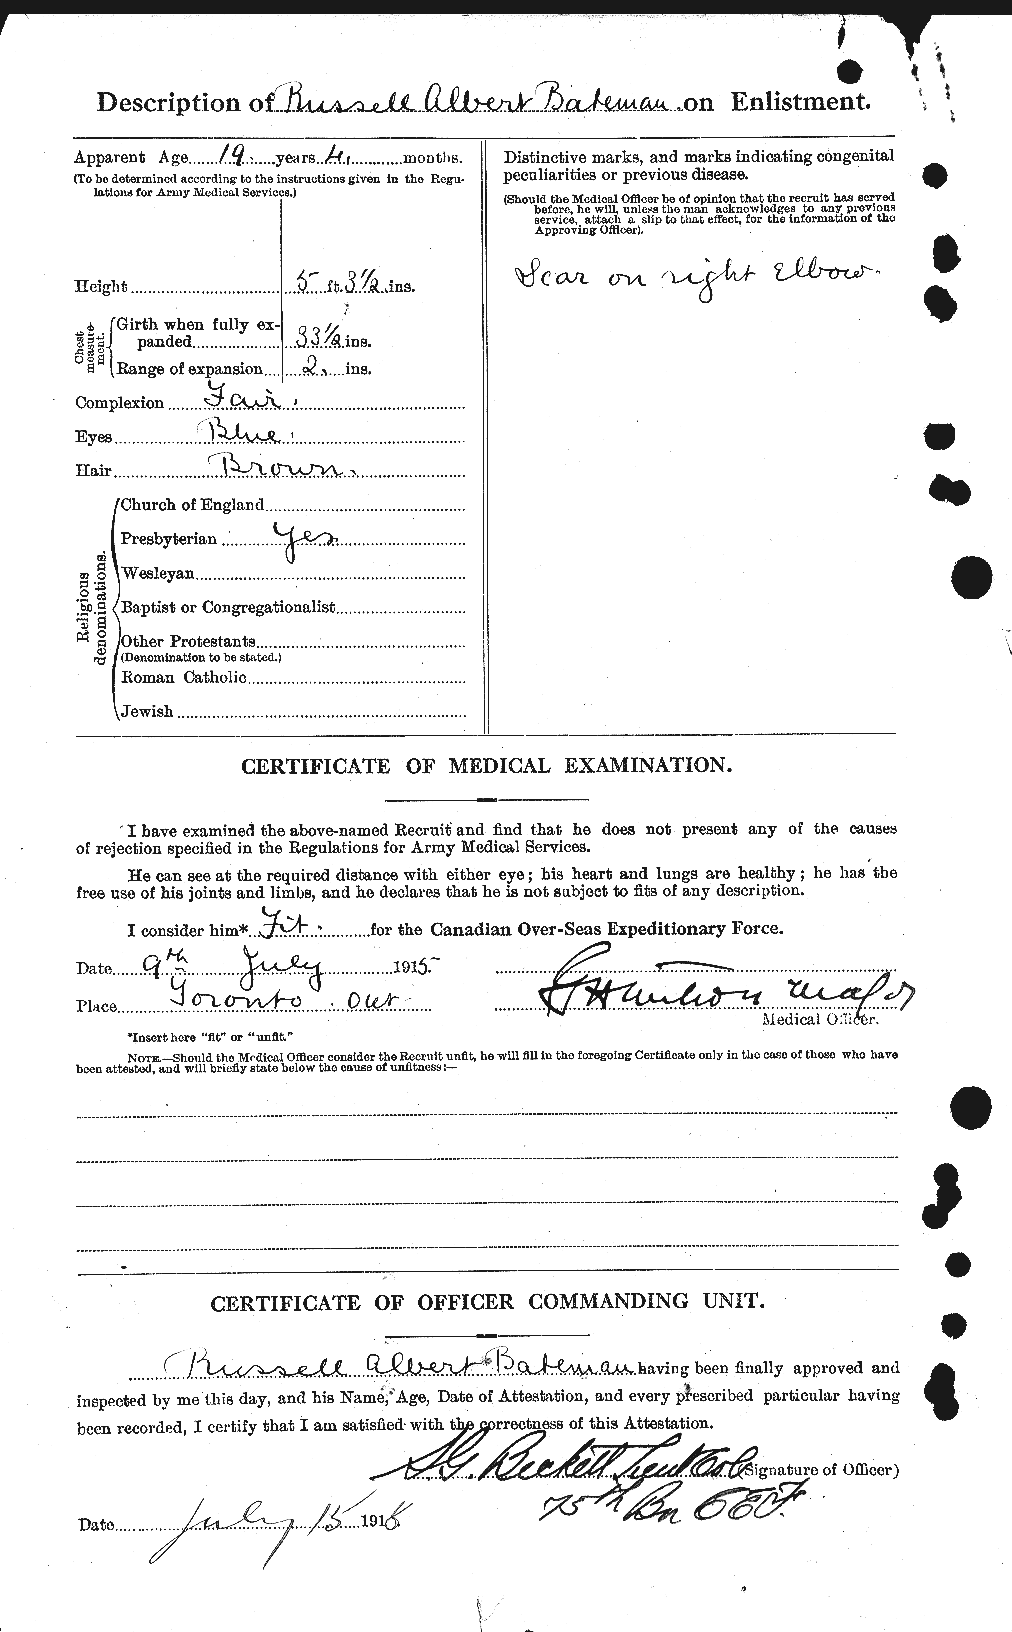 Personnel Records of the First World War - CEF 227976b